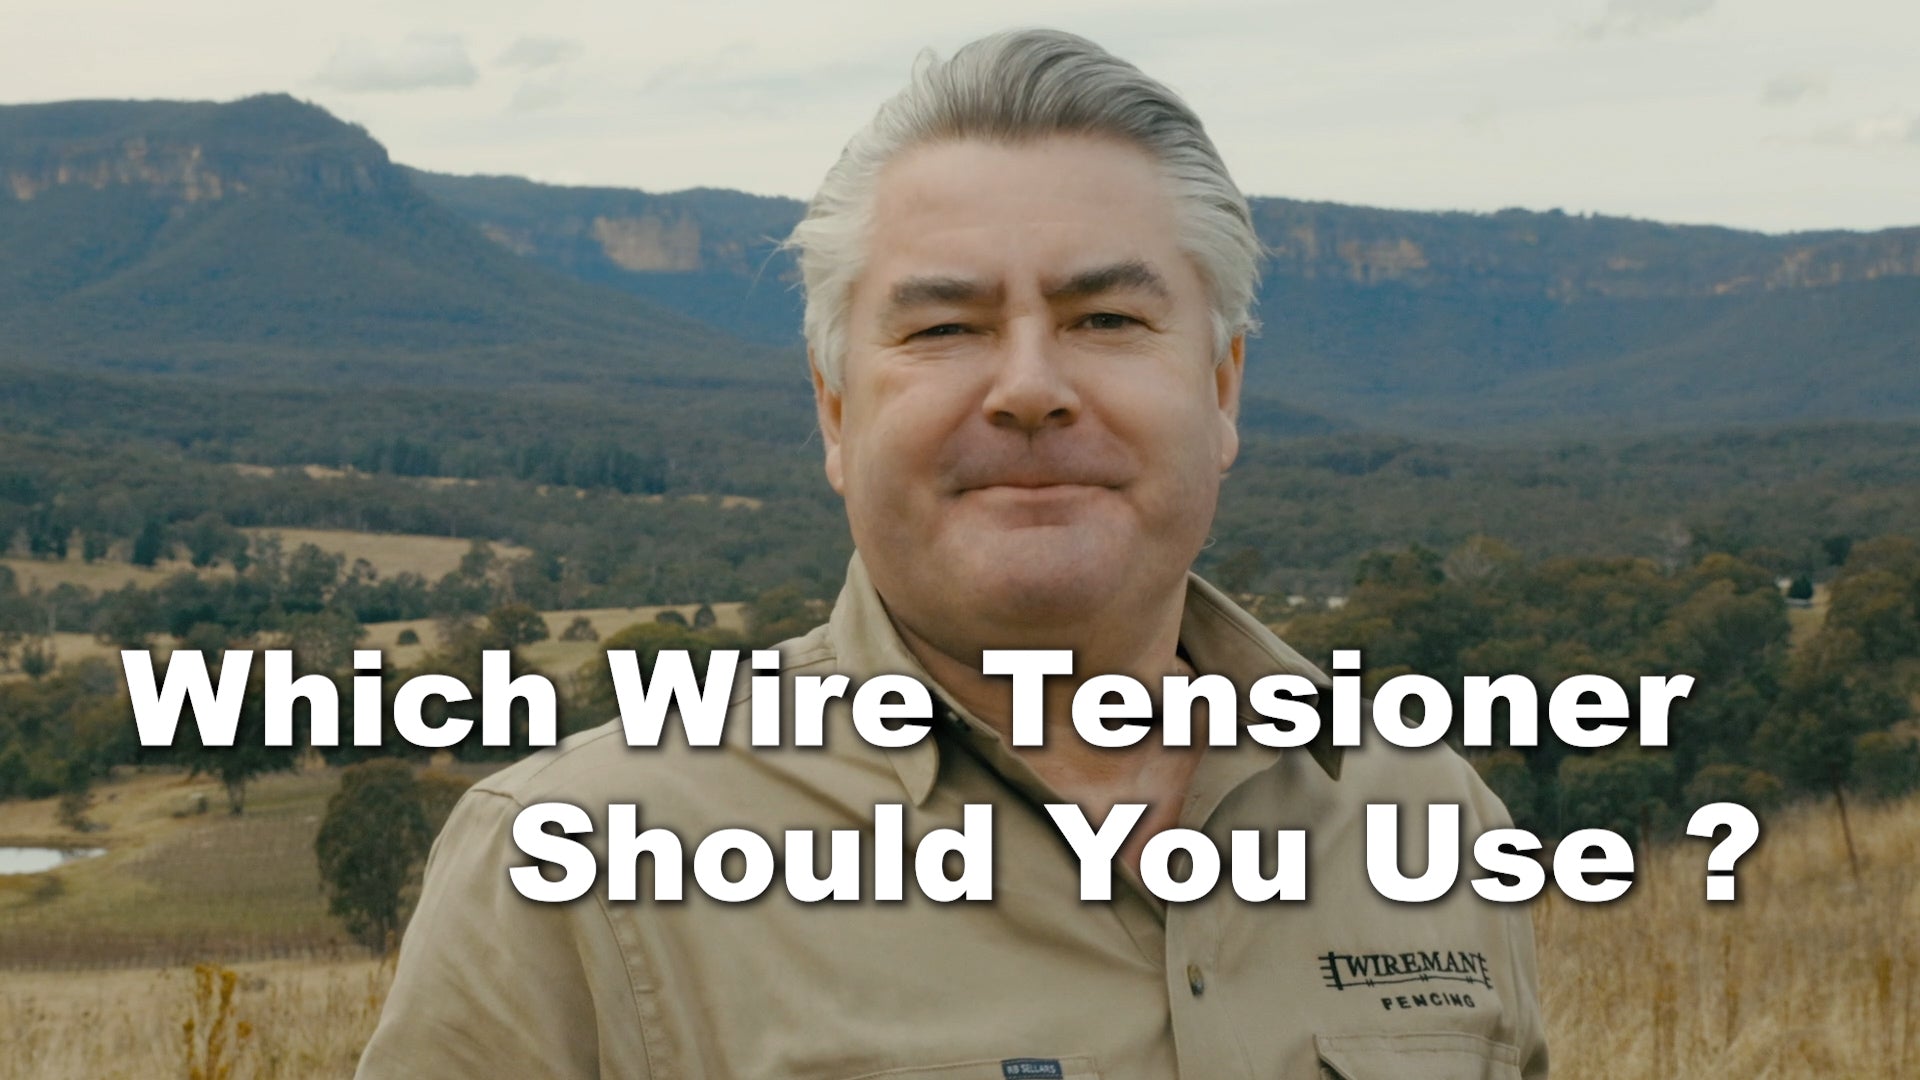 Load video: Which wire tensioner should I use video 